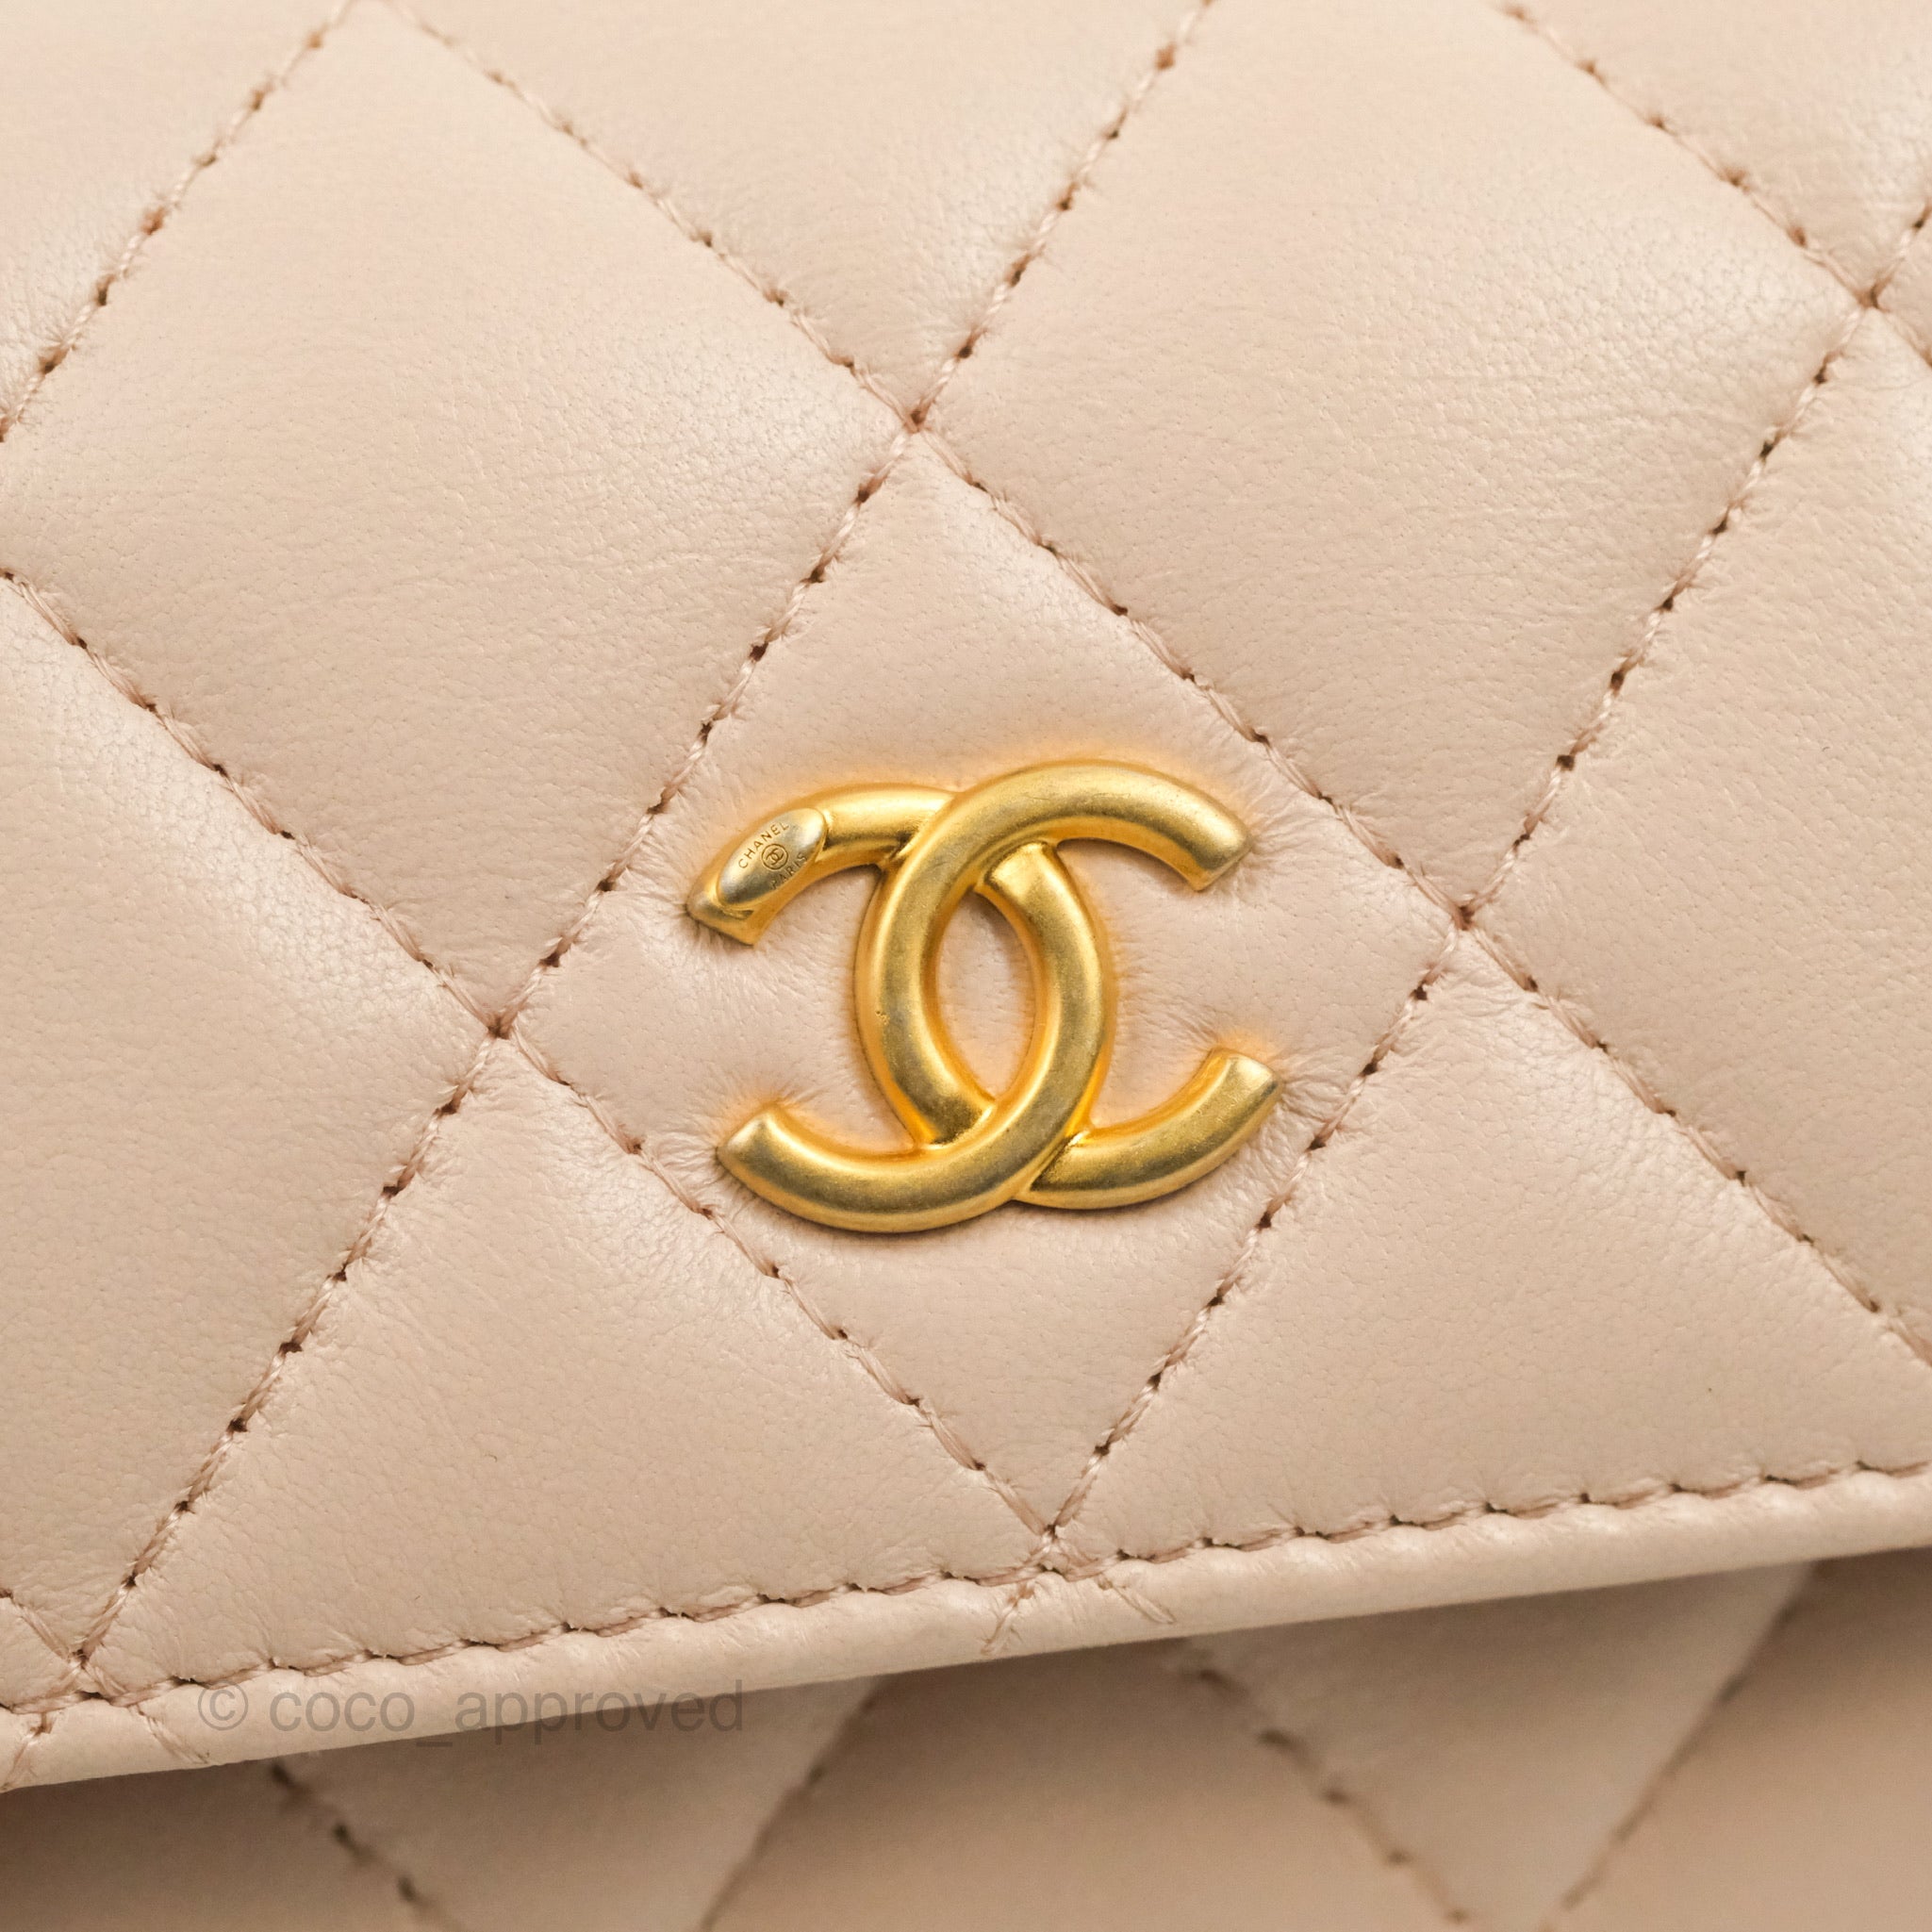 Chanel Coral Pink Quilted Lambskin Pearl Crush Flap Bag Gold Hardware (Very Good)